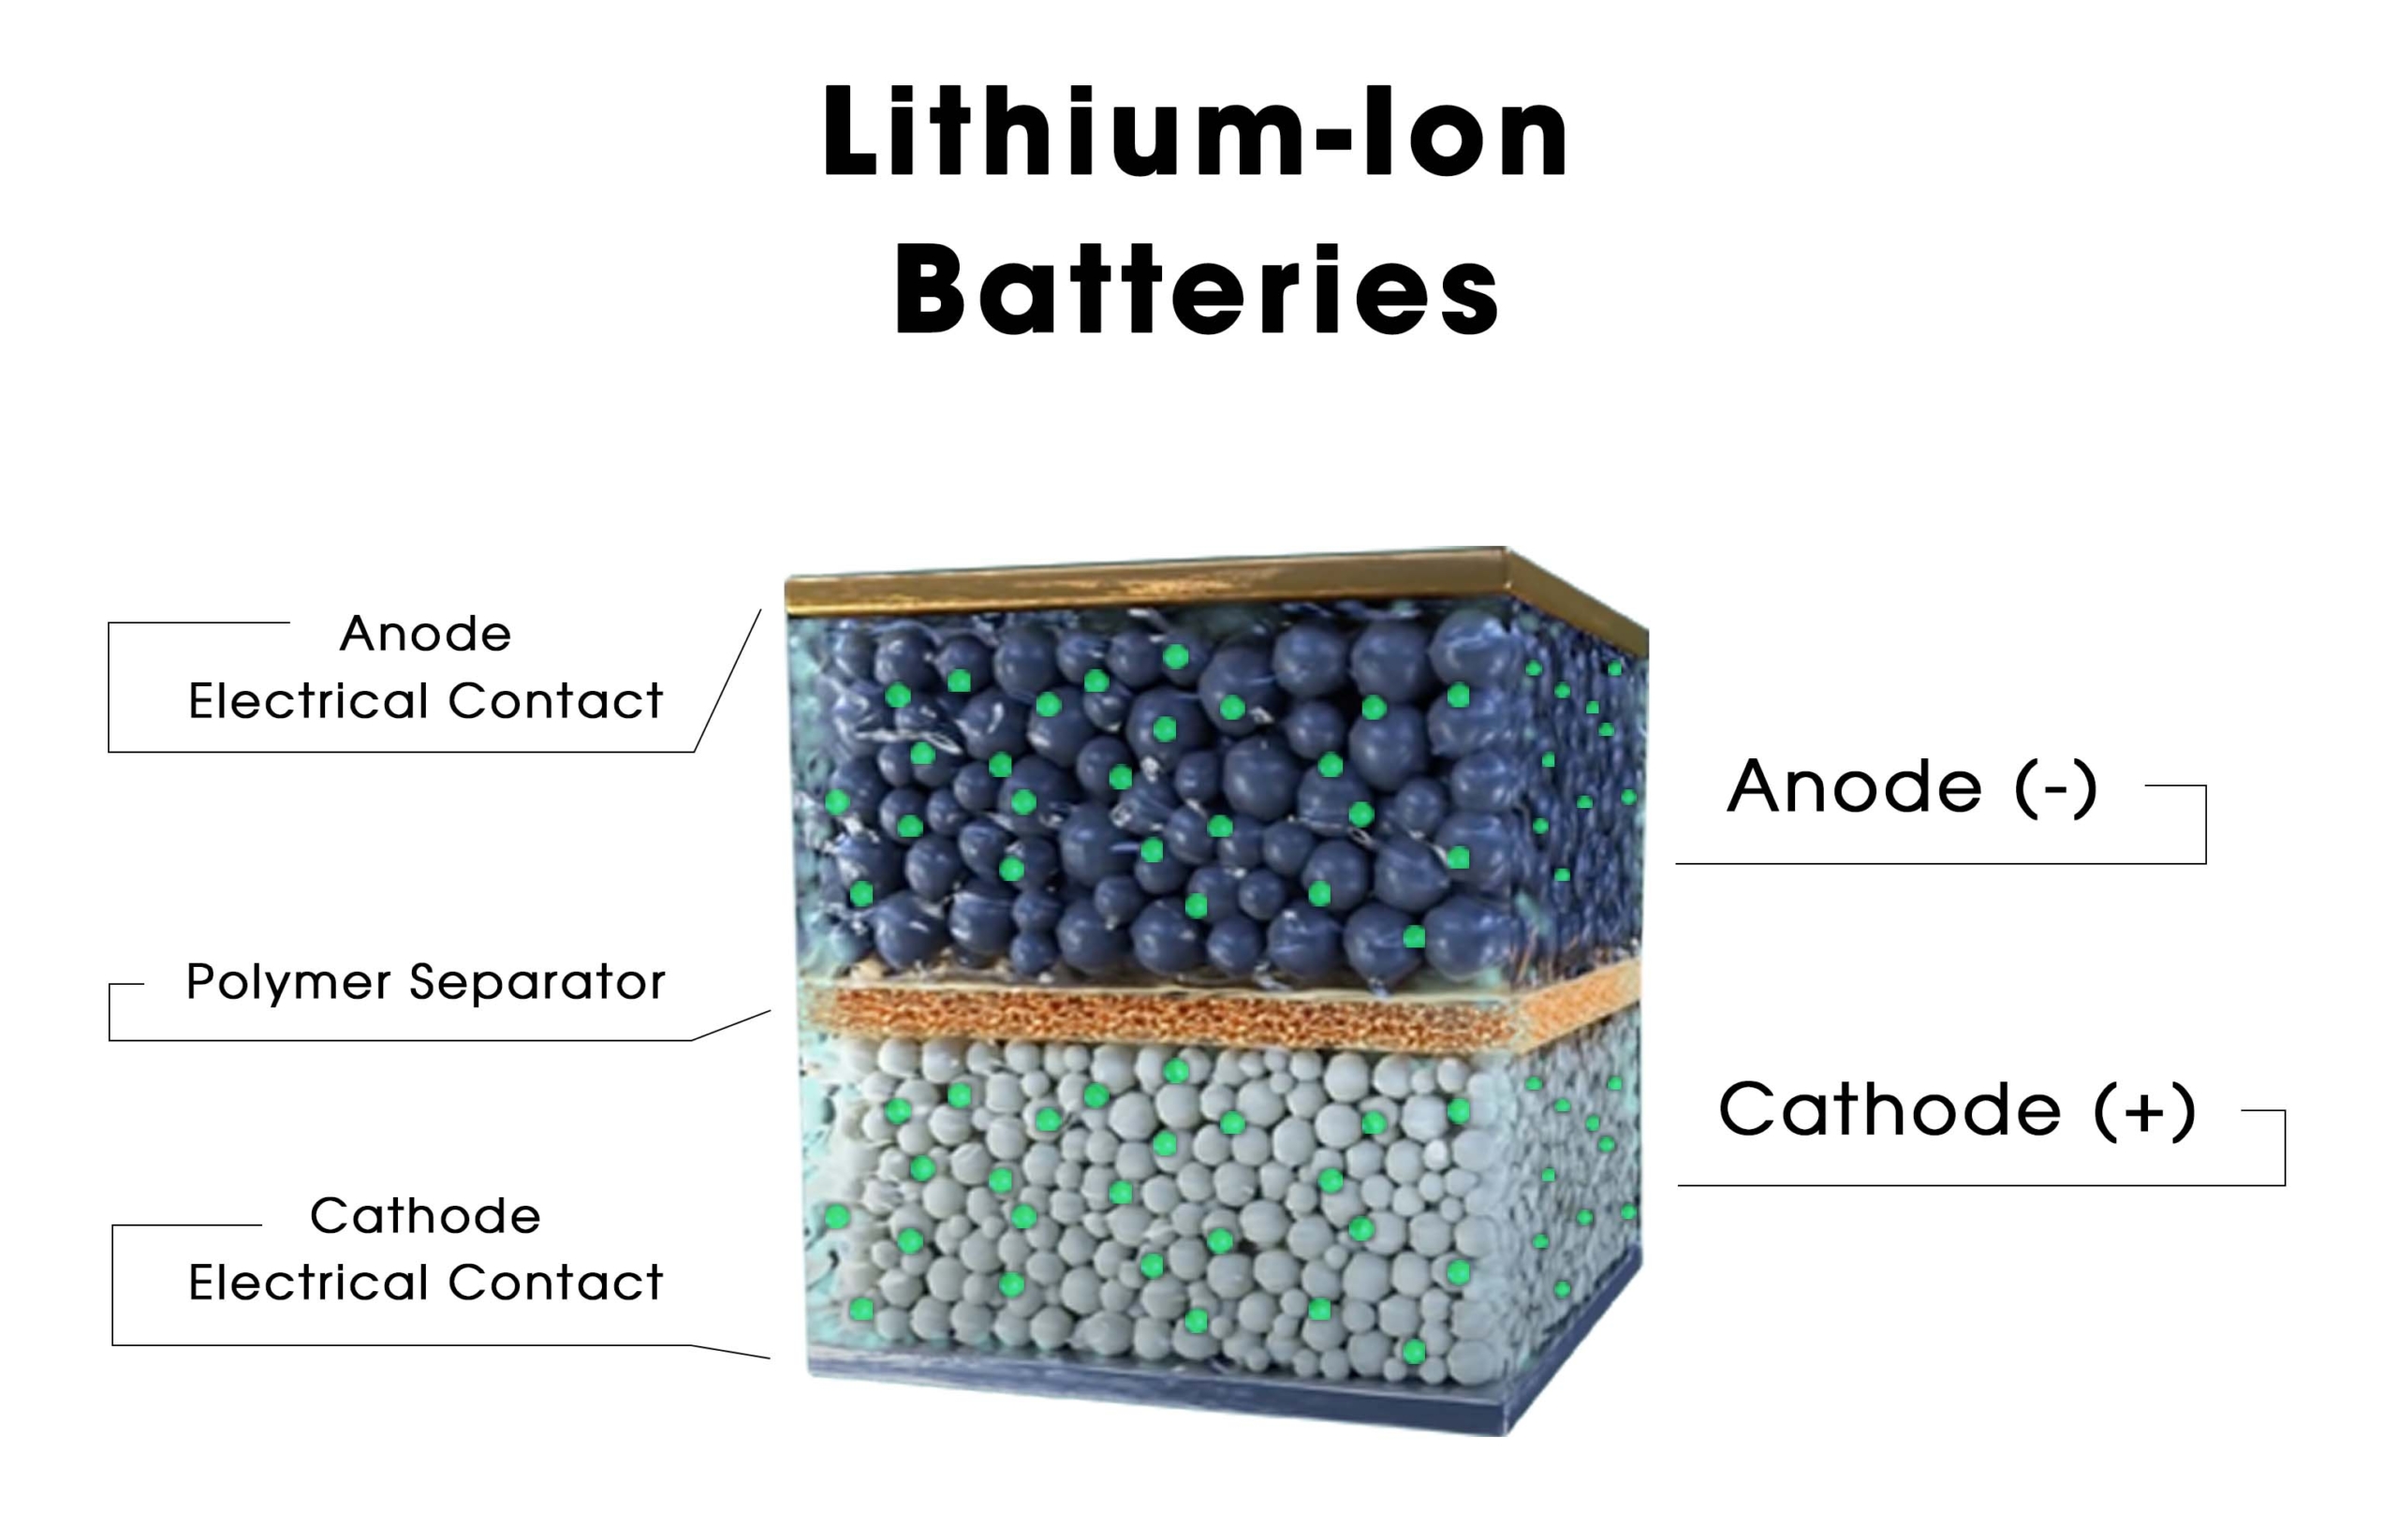 Solid-state batteries: how they work Battery